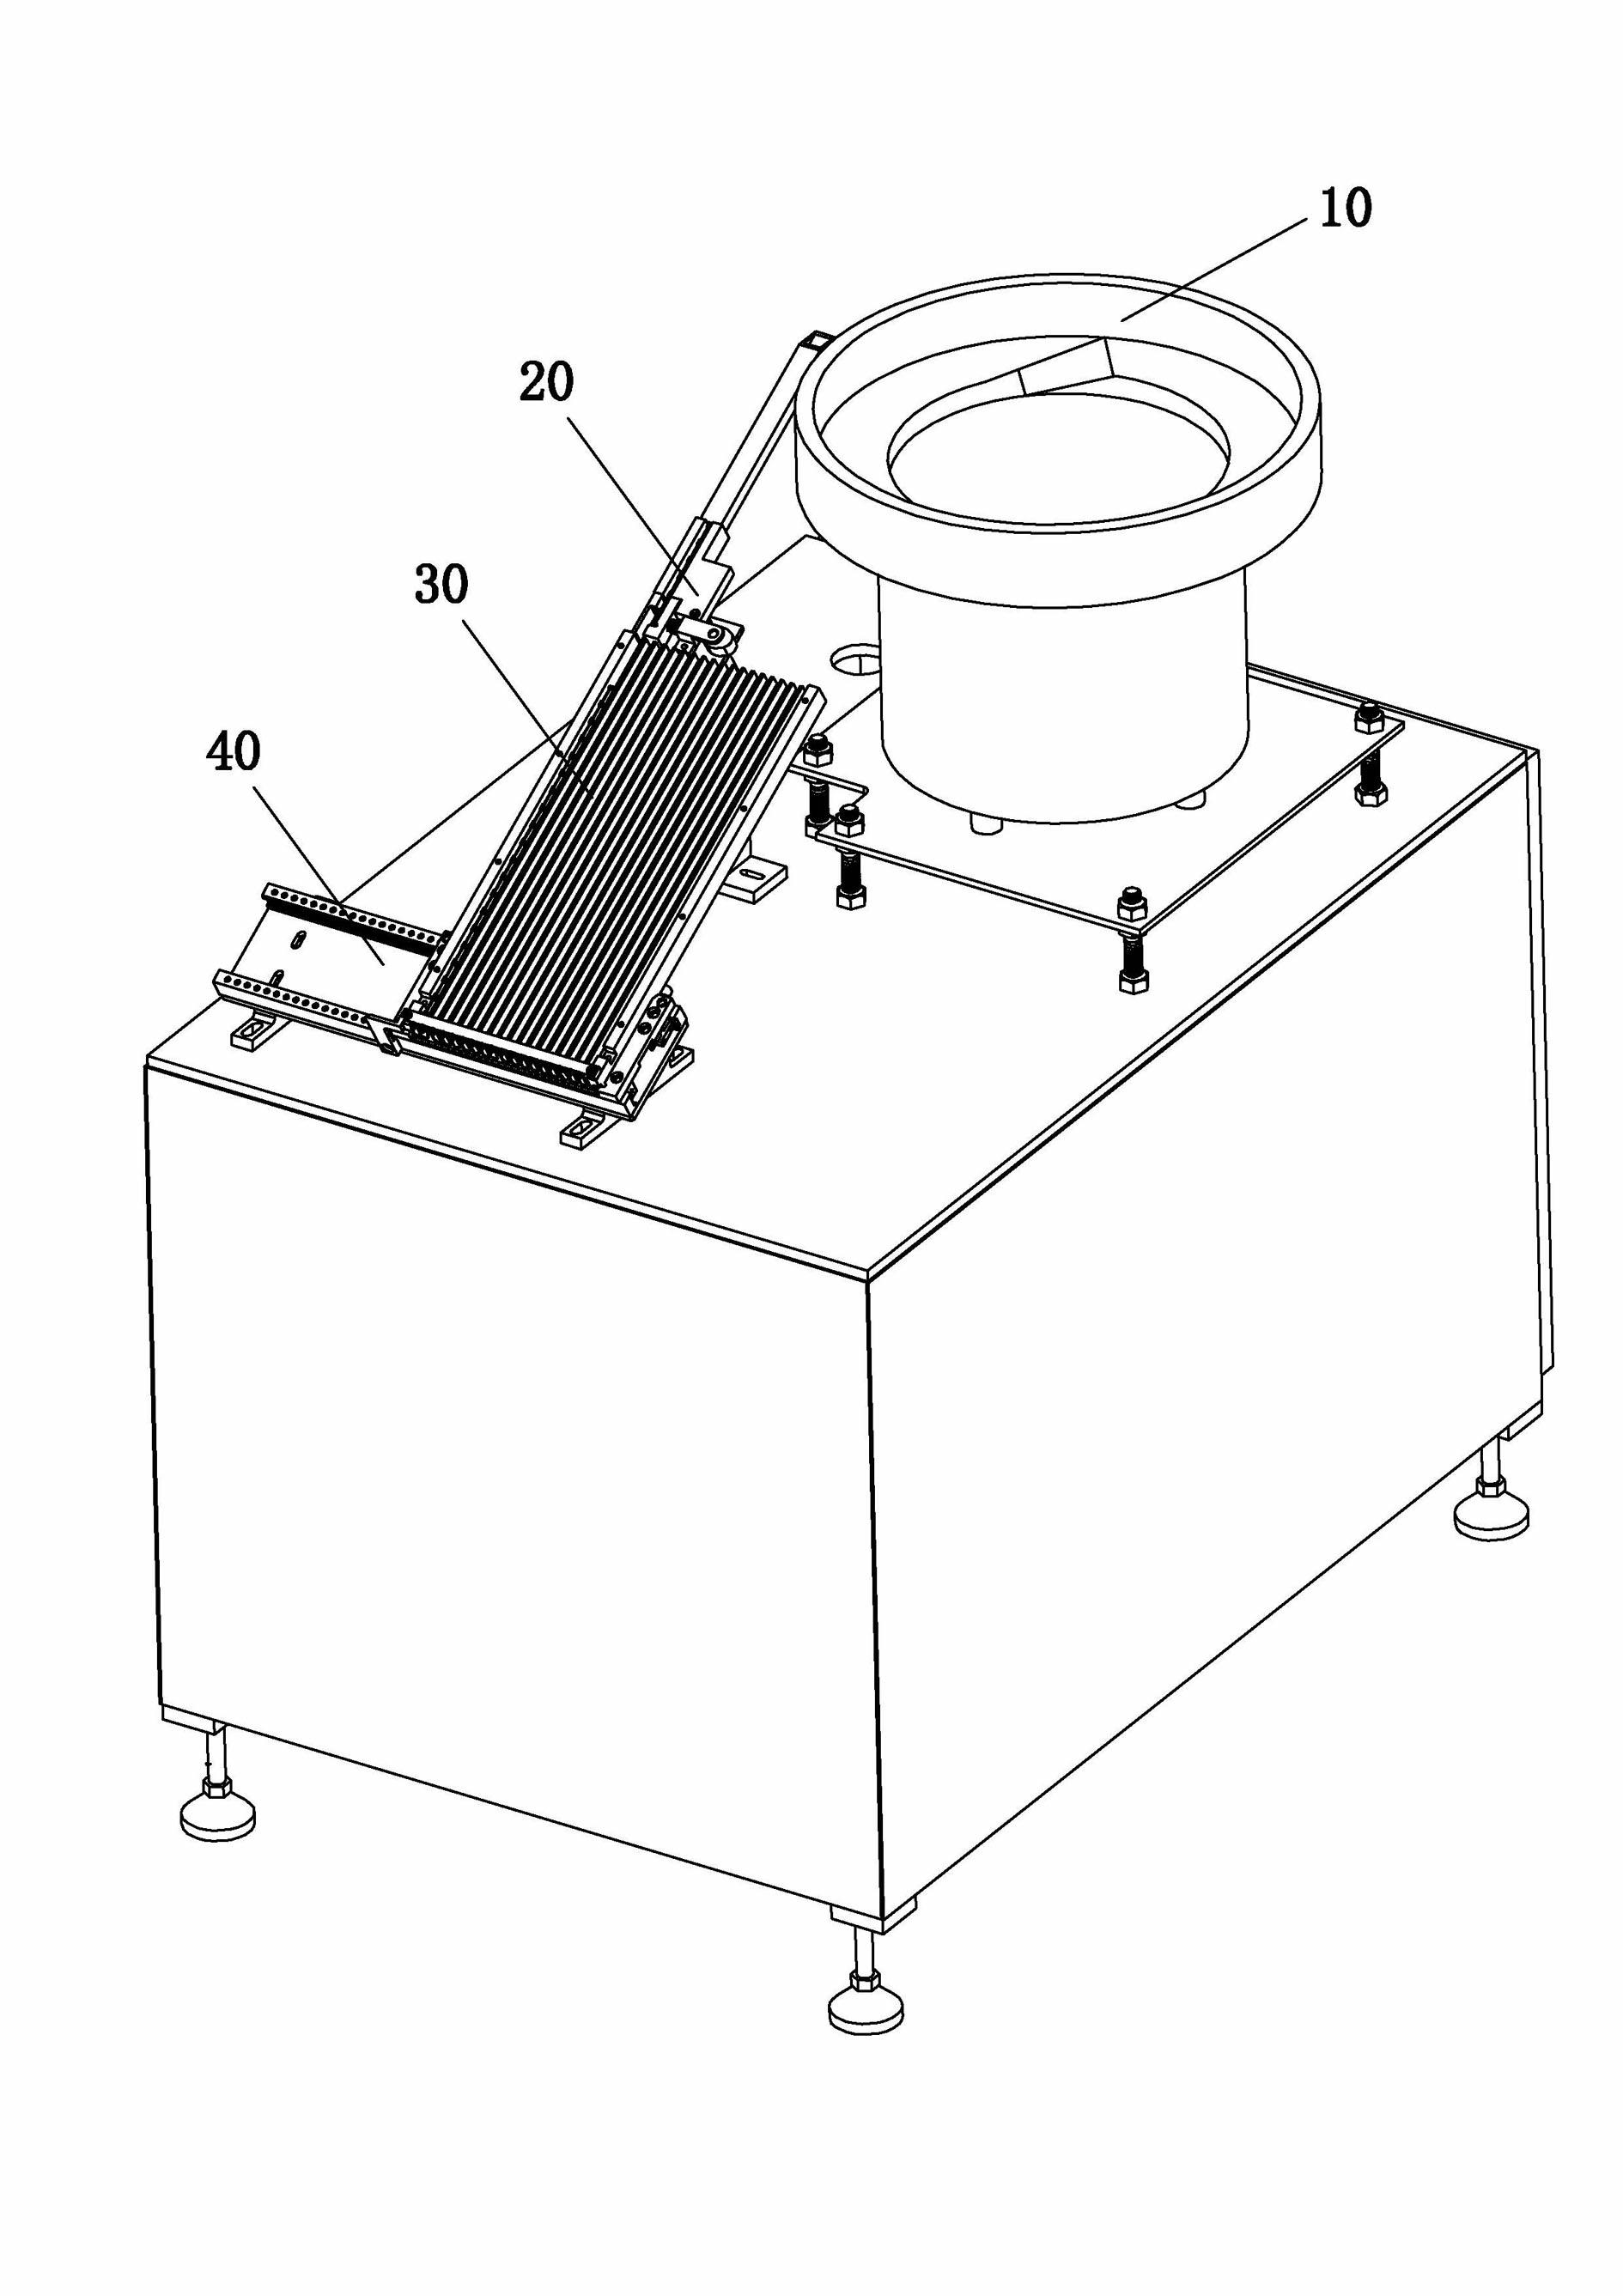 Feeding method capable of changing bulk material into tubed material